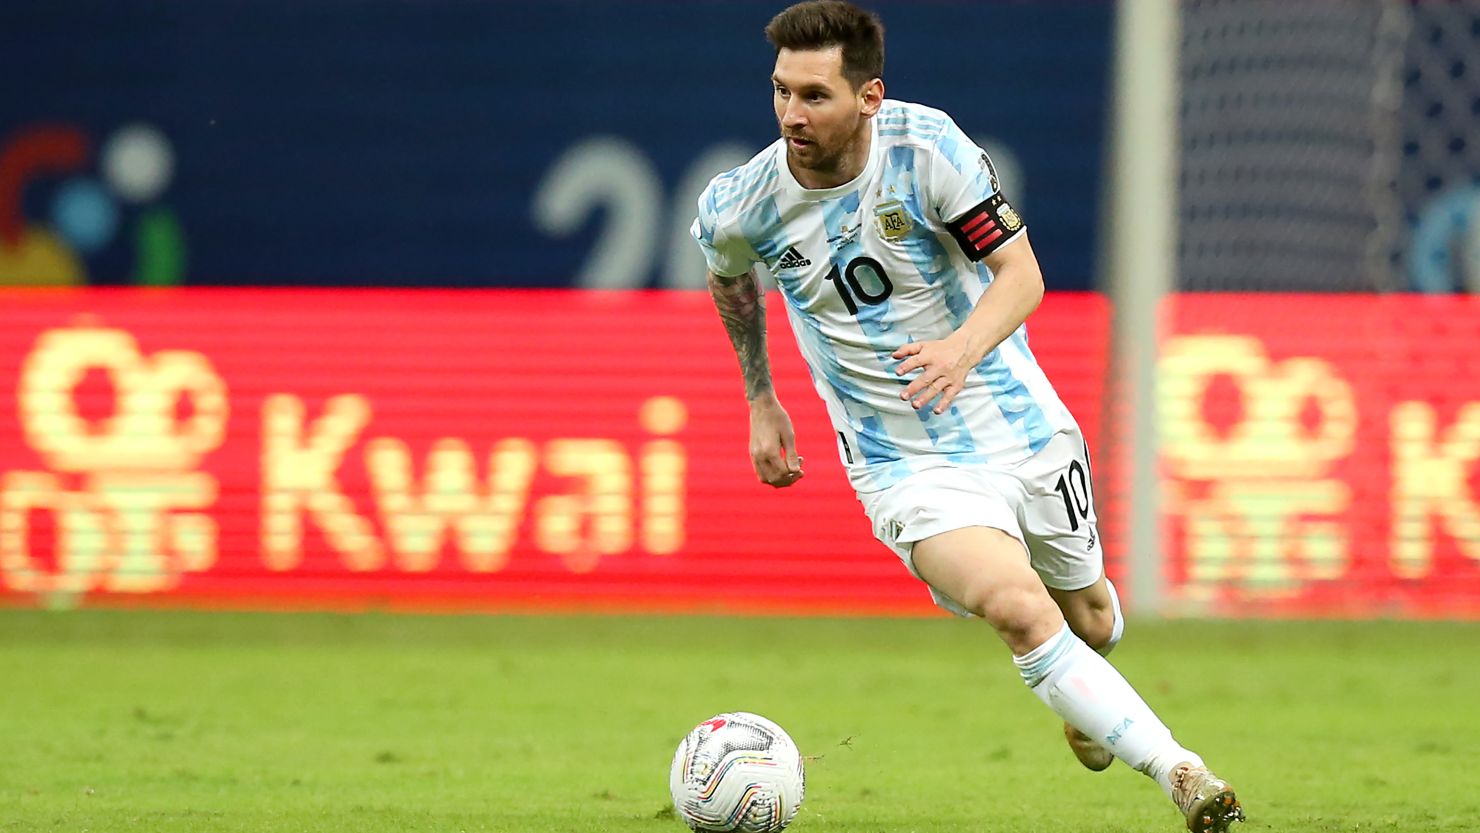 Lionel Messi equaled the all-time appearance record for the Argentine national team.